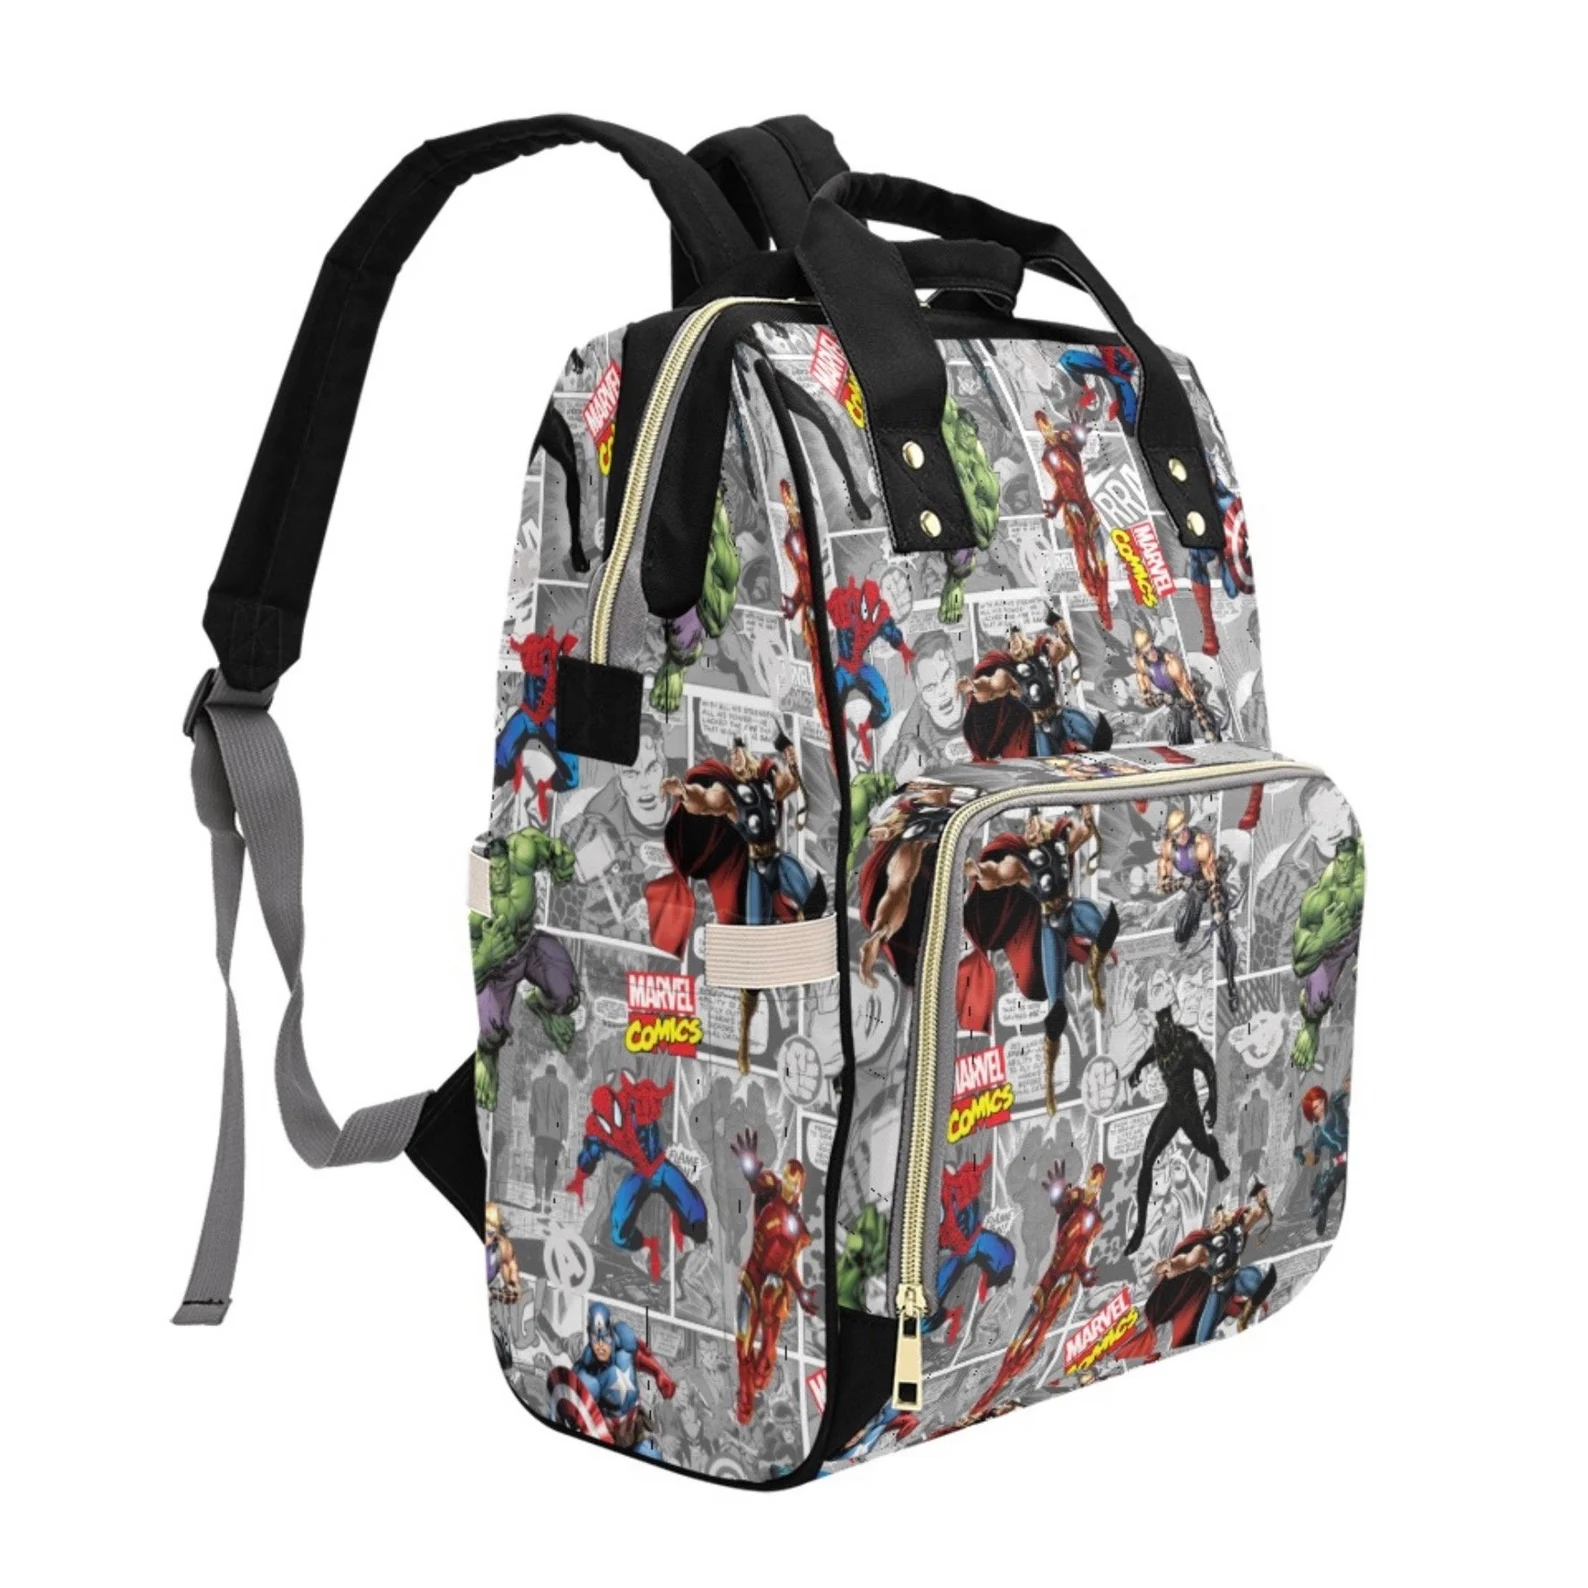 Several Marvel characters overlaid on a background of their comics on a backpack